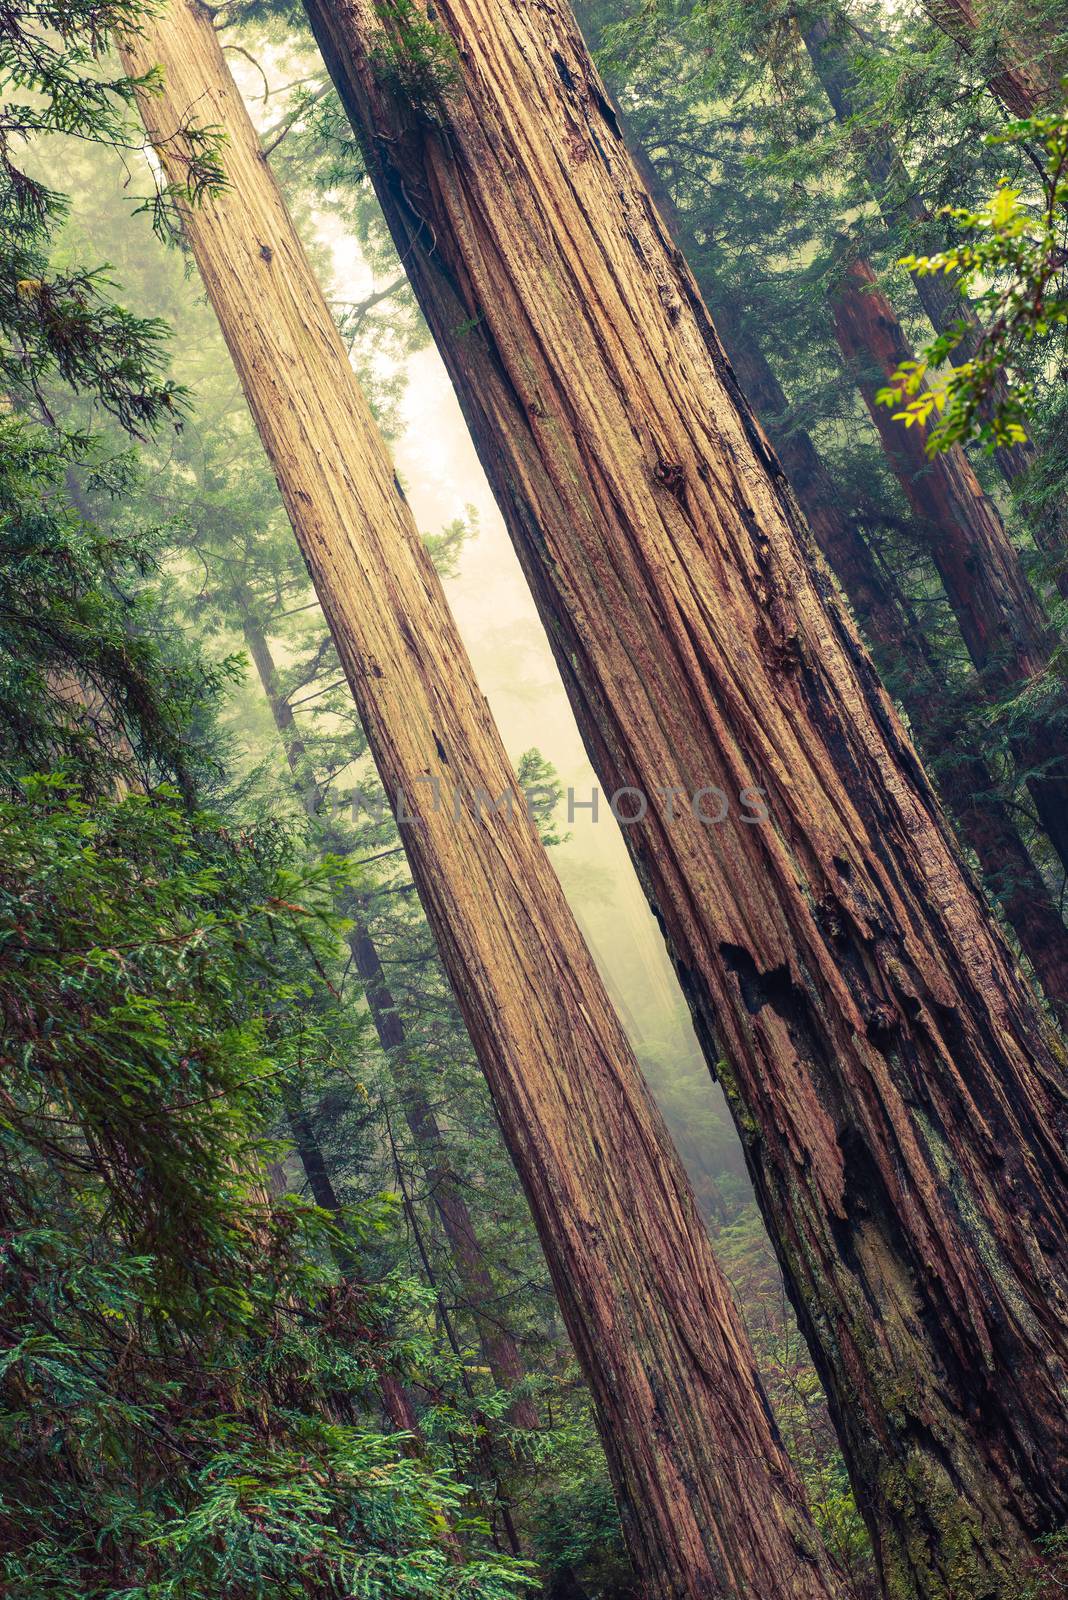 Grand Redwood Trees in Redwood National Park, California, United States.